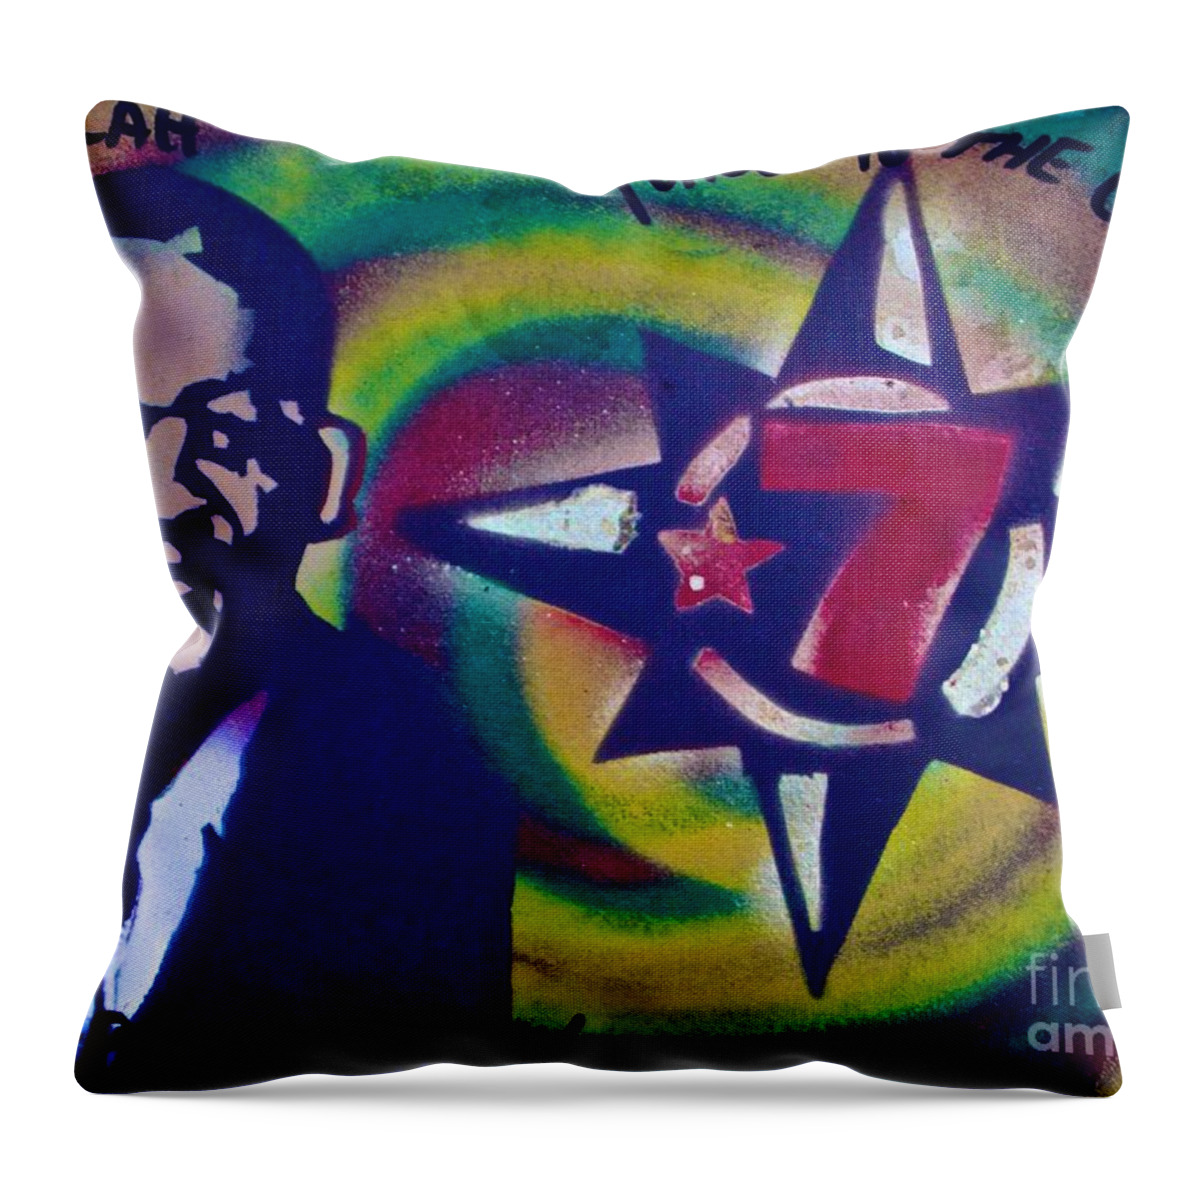 Clarence 13x Throw Pillow featuring the painting Clarence 13x by Tony B Conscious